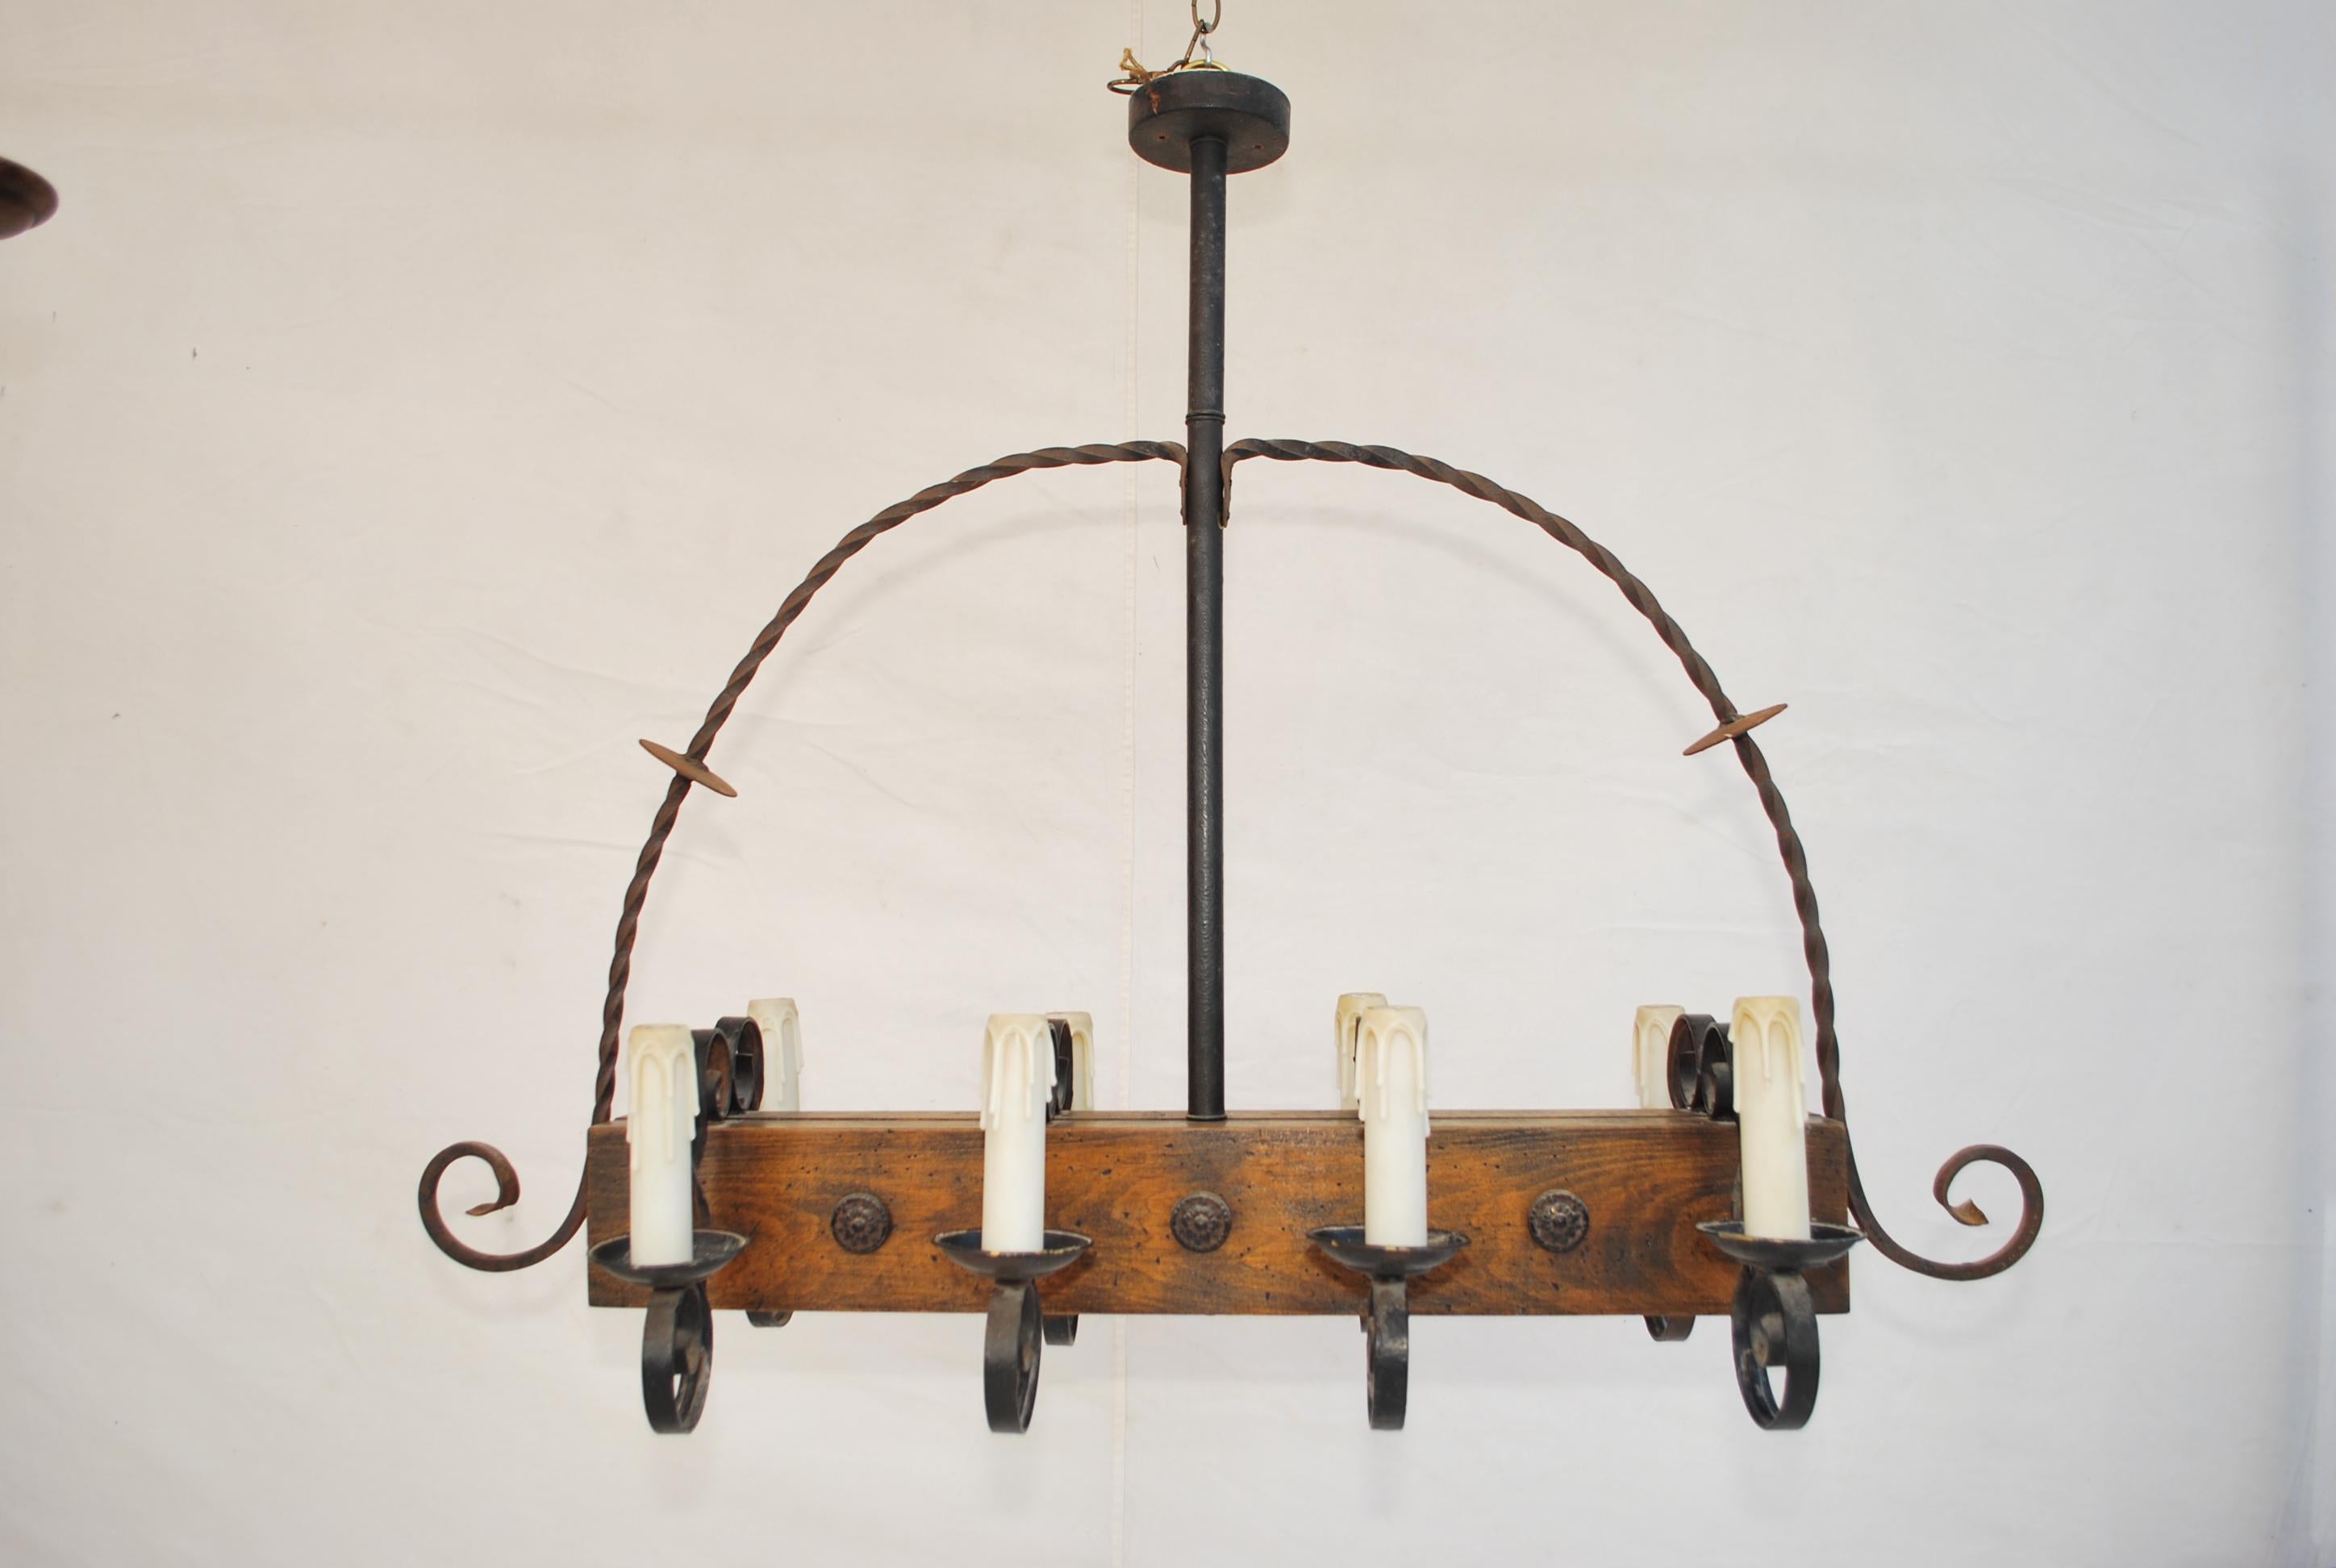 A beautiful wood and iron chandelier, the patina is allot nicer in person, the iron was hand-forged.